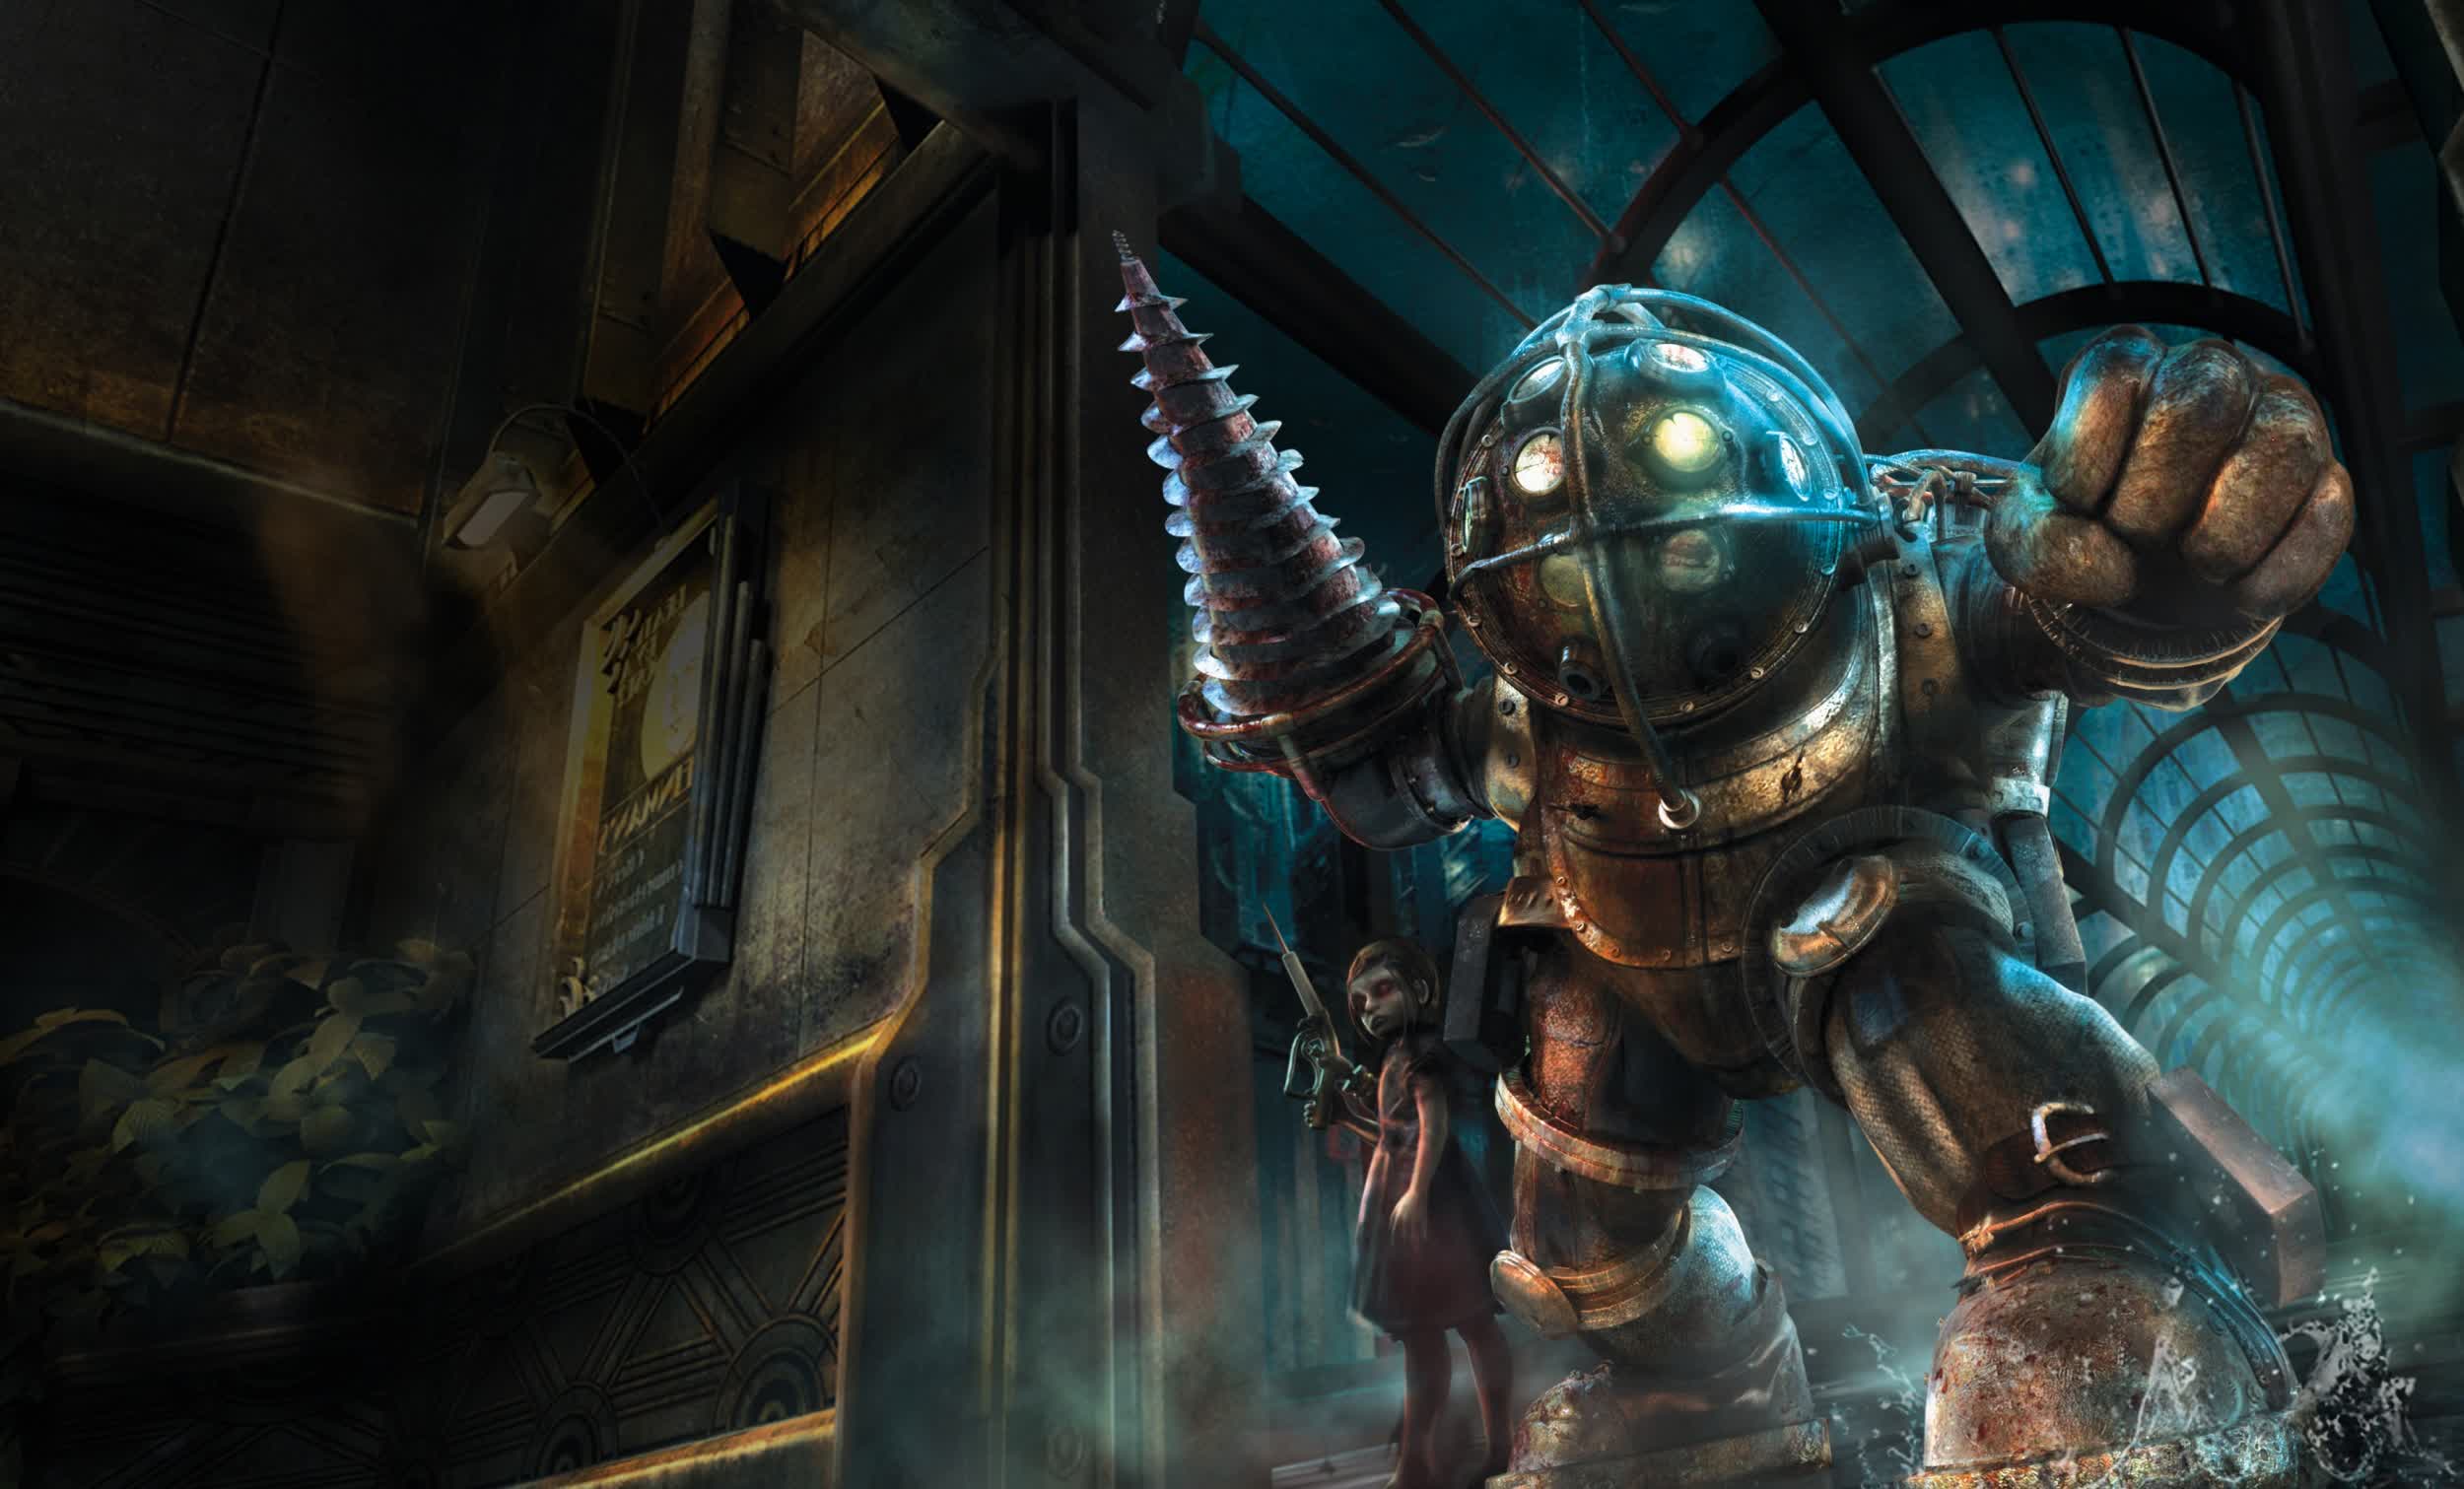 Free games alert: All three BioShock titles available now, Far Cry 4 giveaway next month